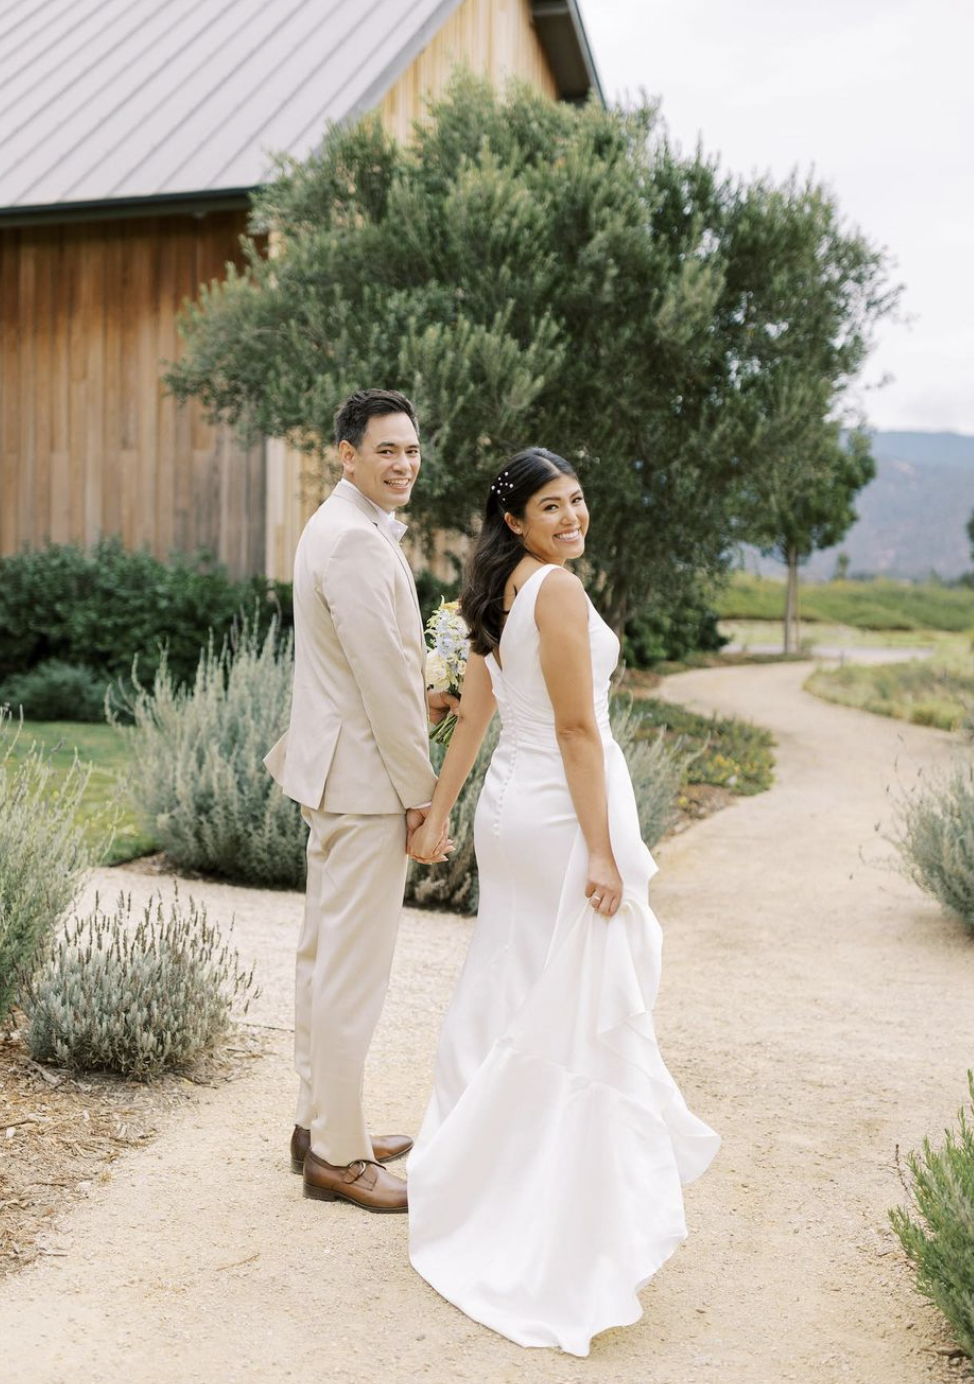 brave and maiden, a santa ynez wedding venue and winery, was the most beautiful ranch destination for this LA couple's dream wedding